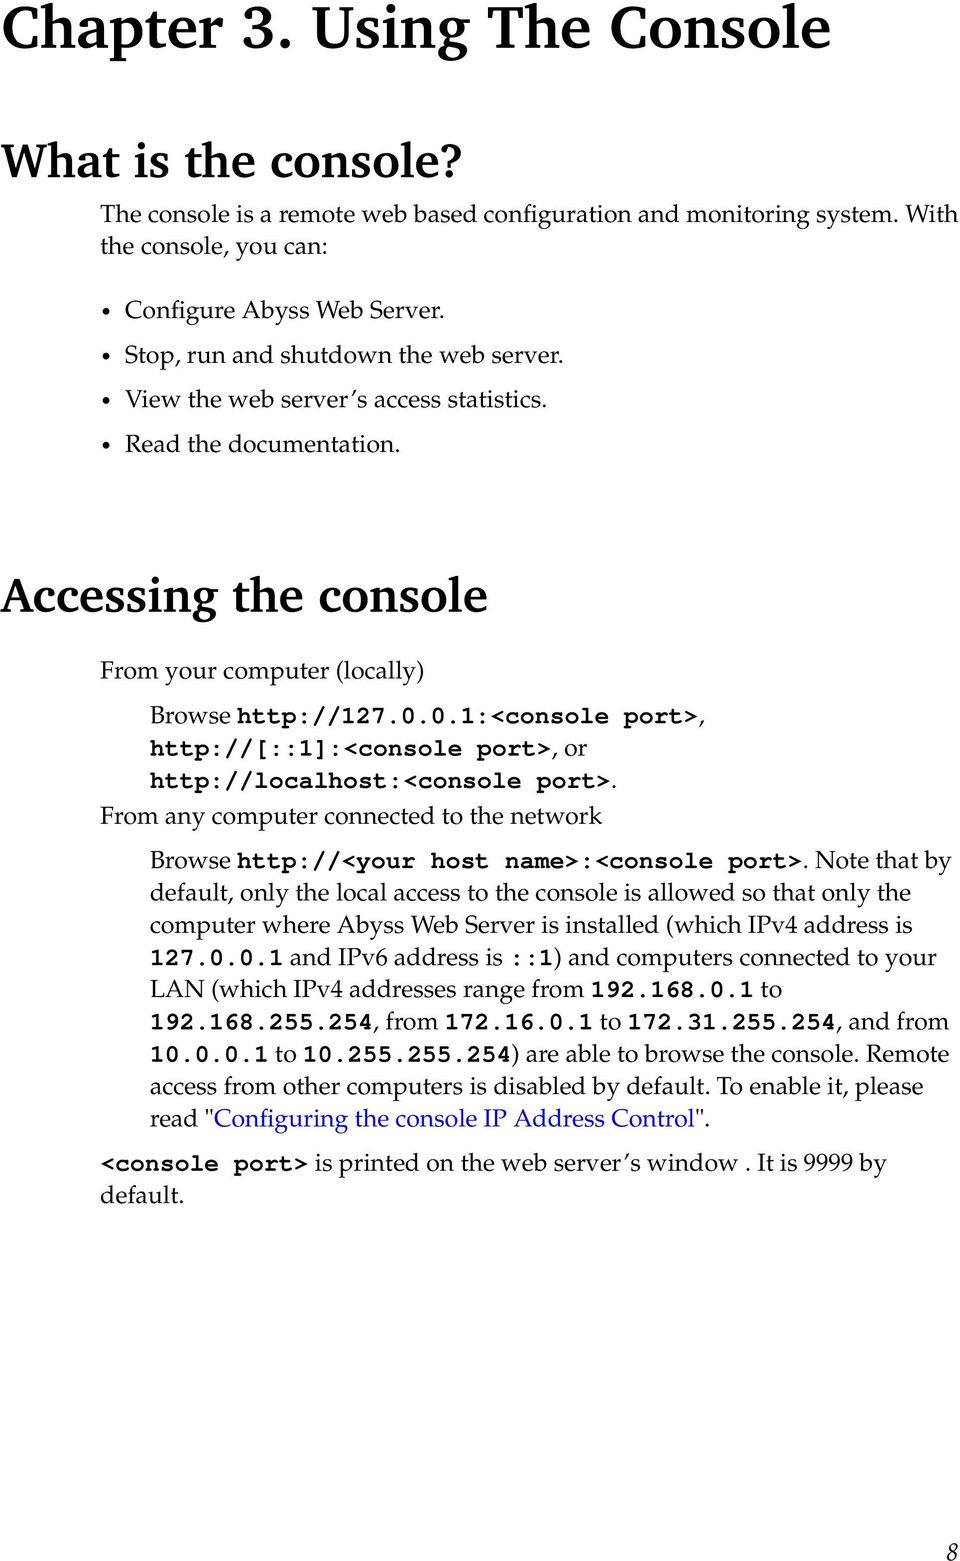 0.1:<console port>, http://[::1]:<console port>, or http://localhost:<console port>. From any computer connected to the network Browse http://<your host name>:<console port>.